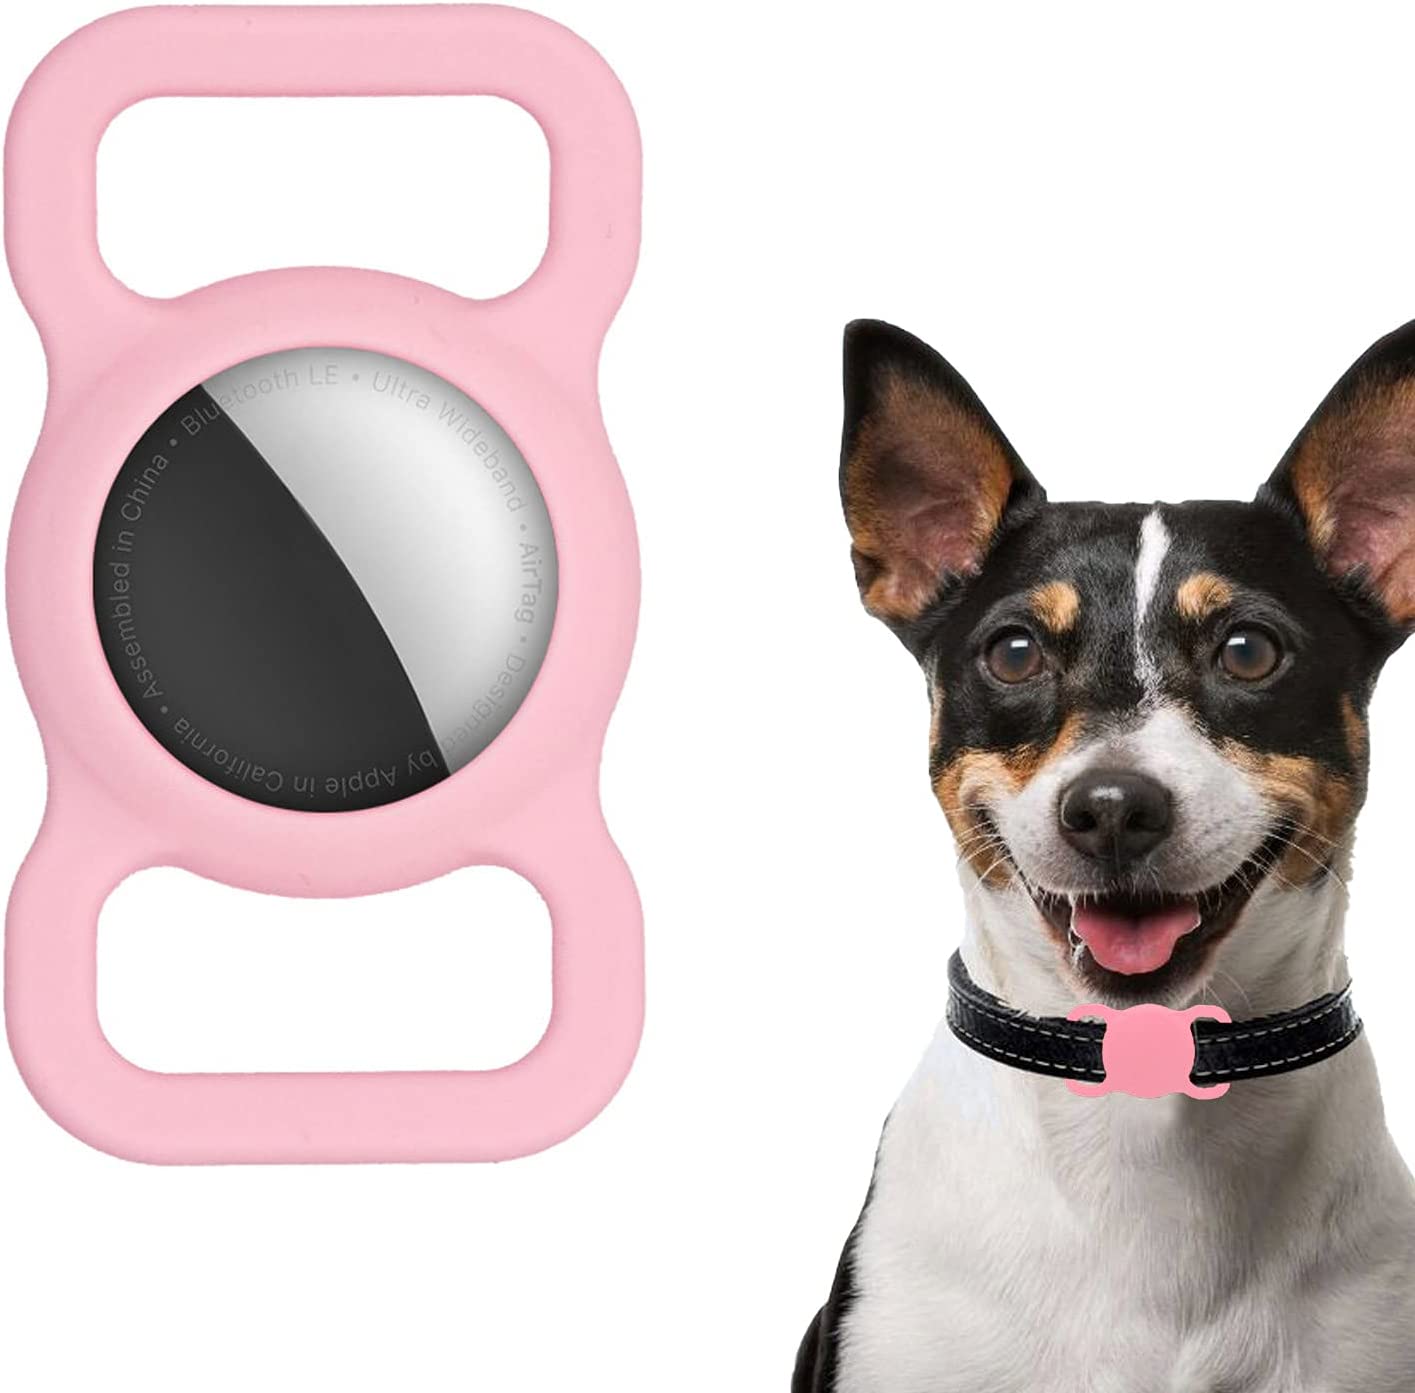 Air Tag Dog Collar Holder Waterproof Small Compatible Protective Cover for Apple Airtag GPS Tracking Dog Cat Soft Silicone Waterproof Protective for Pet Dog Cat and Children Elderly Bags Electronics > GPS Accessories > GPS Cases YAFIYGI Pink  